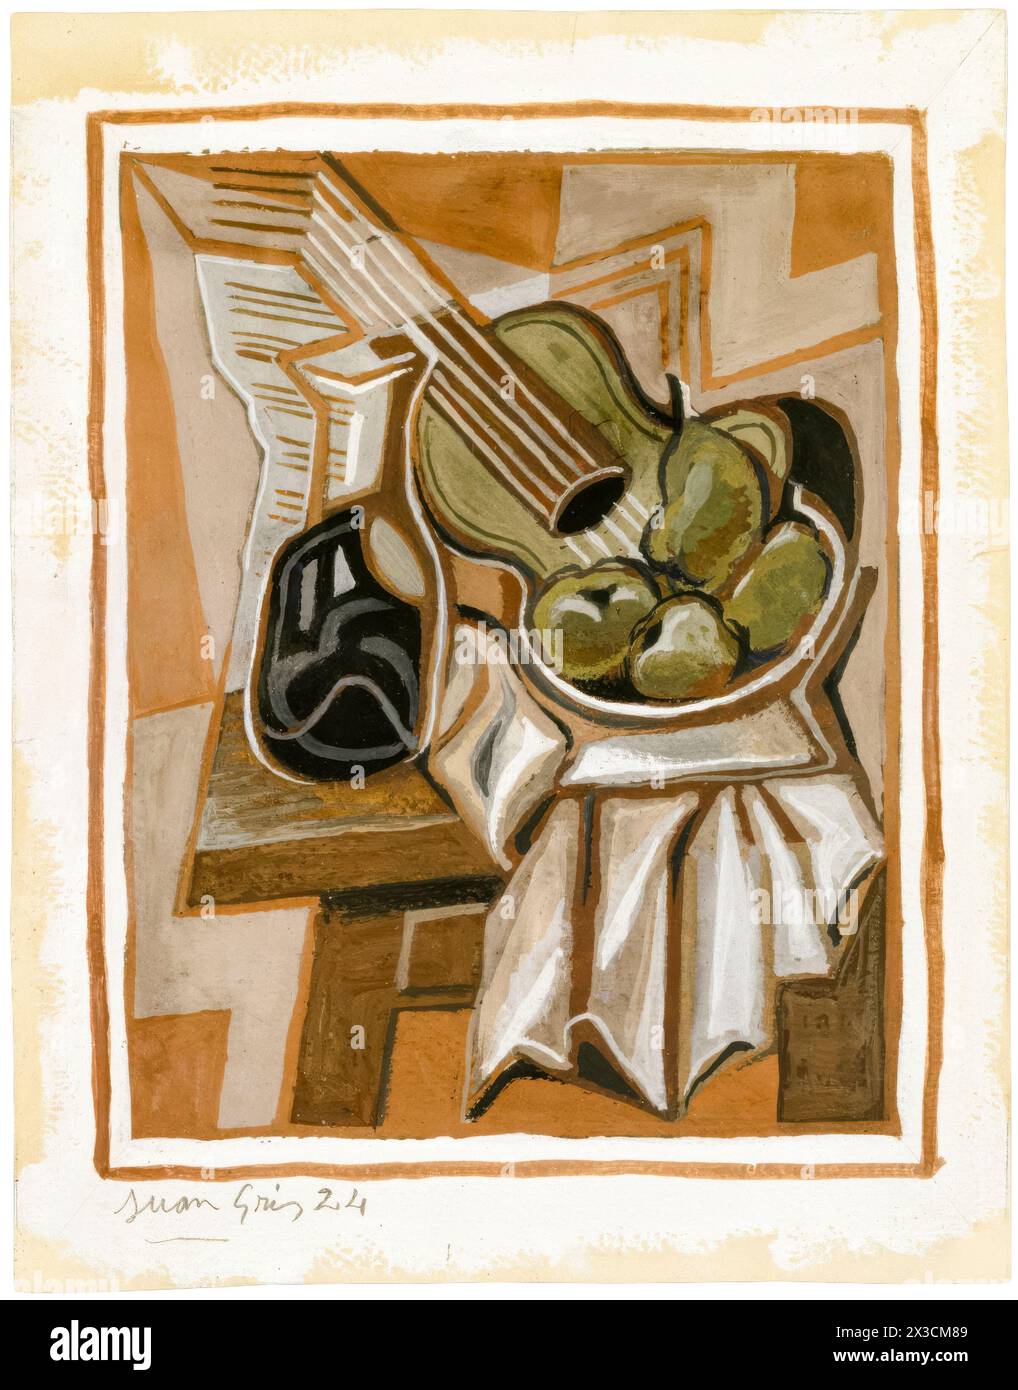 Juan Gris, Still Life with Guitar, abstract painting in gouache on paper, 1924 Stock Photo